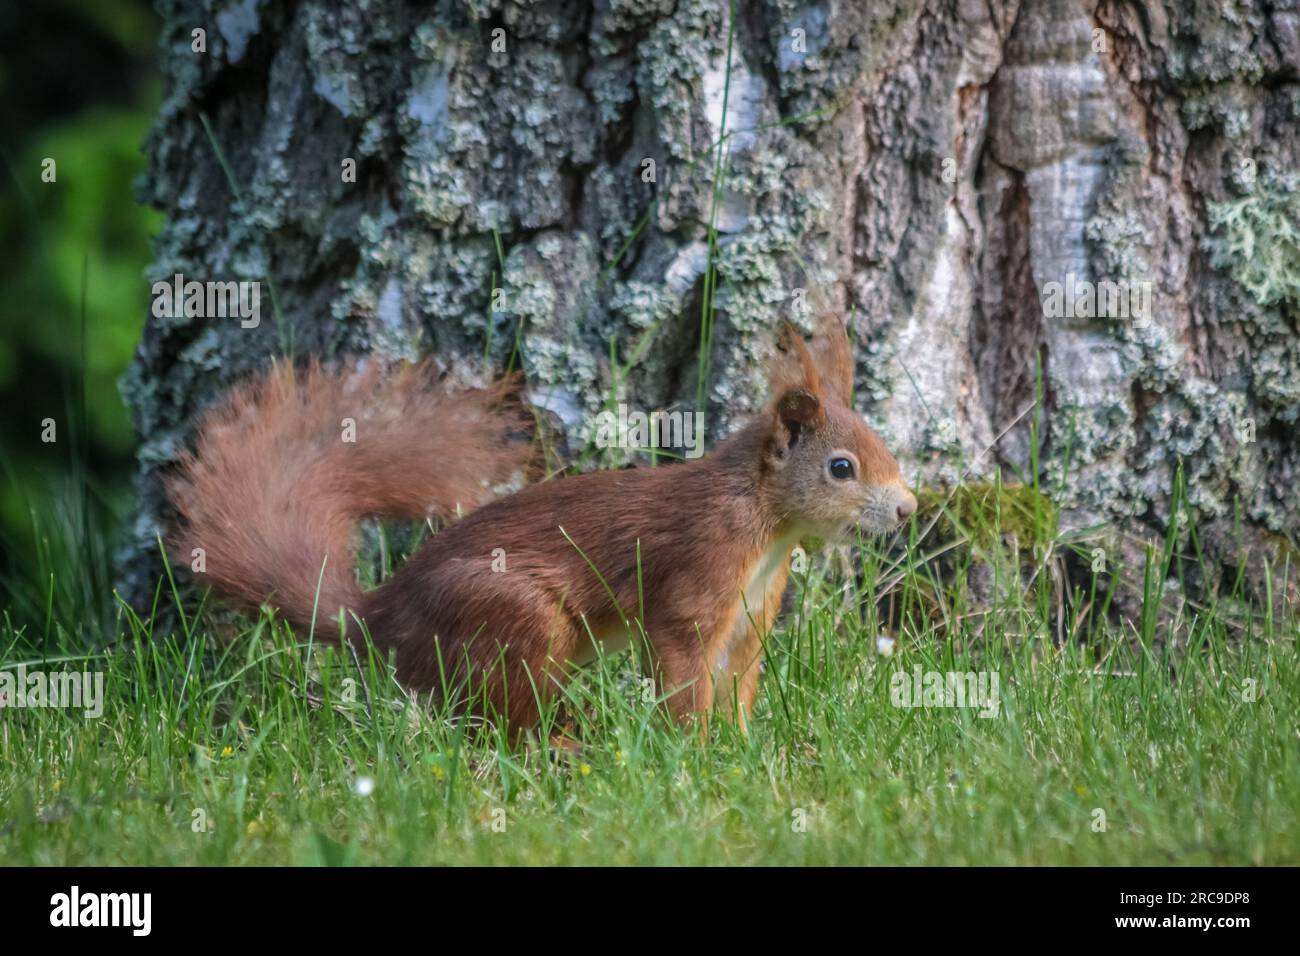 zoology, mammal (mammalia), squirrel on meadow at trunk, Niedernhausen, Hesse, Germany, ADDITIONAL-RIGHTS-CLEARANCE-INFO-NOT-AVAILABLE Stock Photo